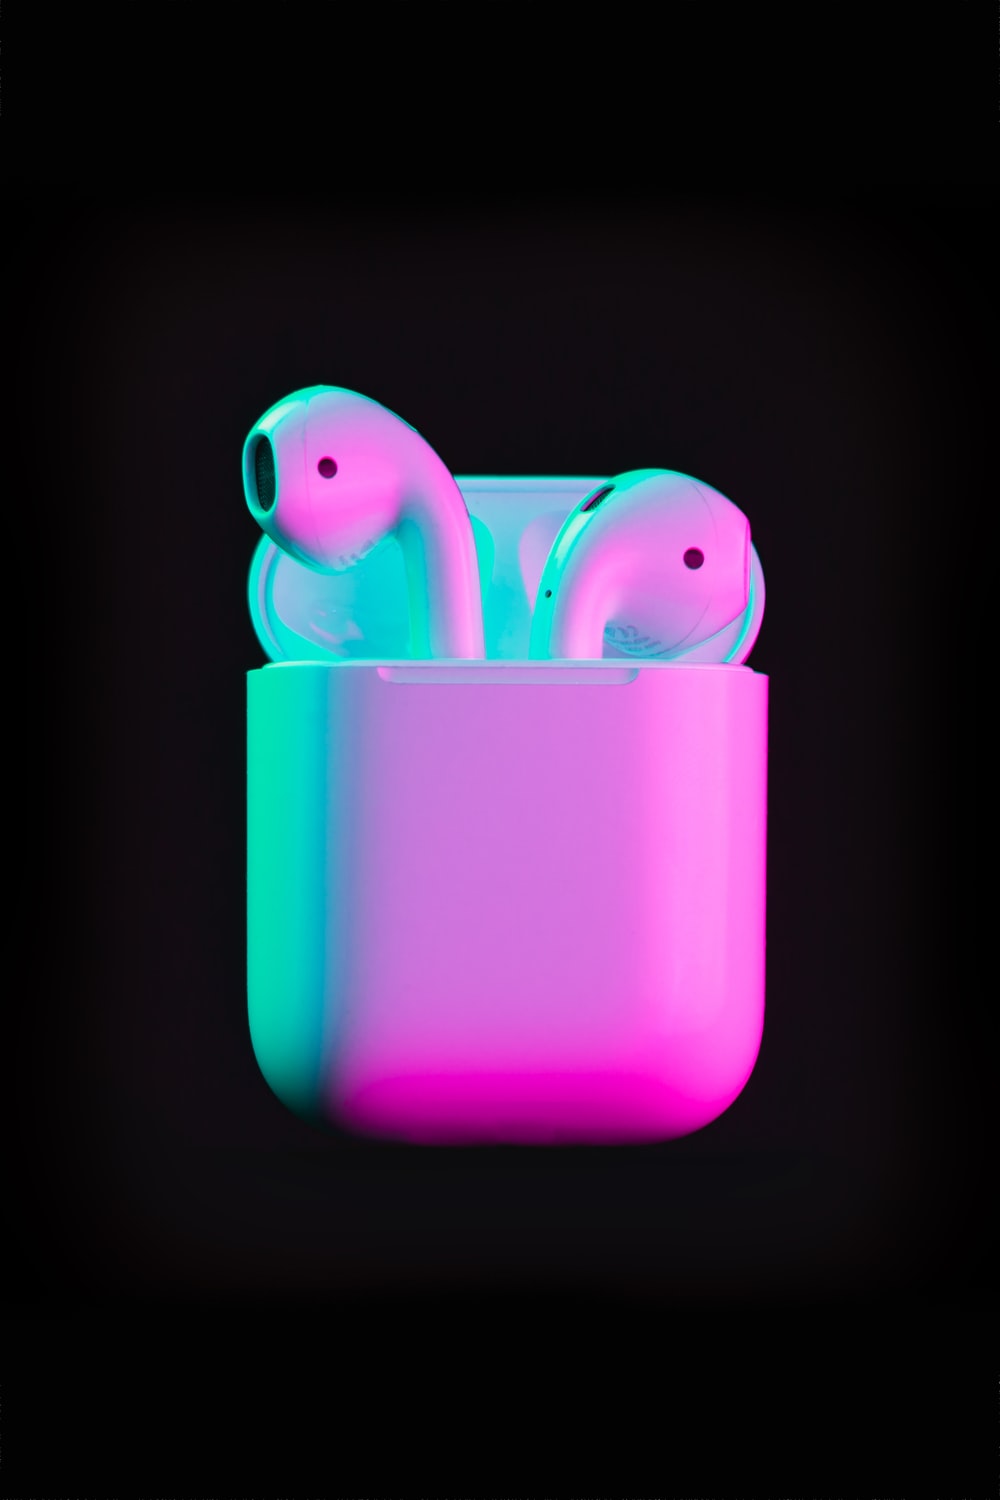 Apple Airpods Picture. Download Free Image